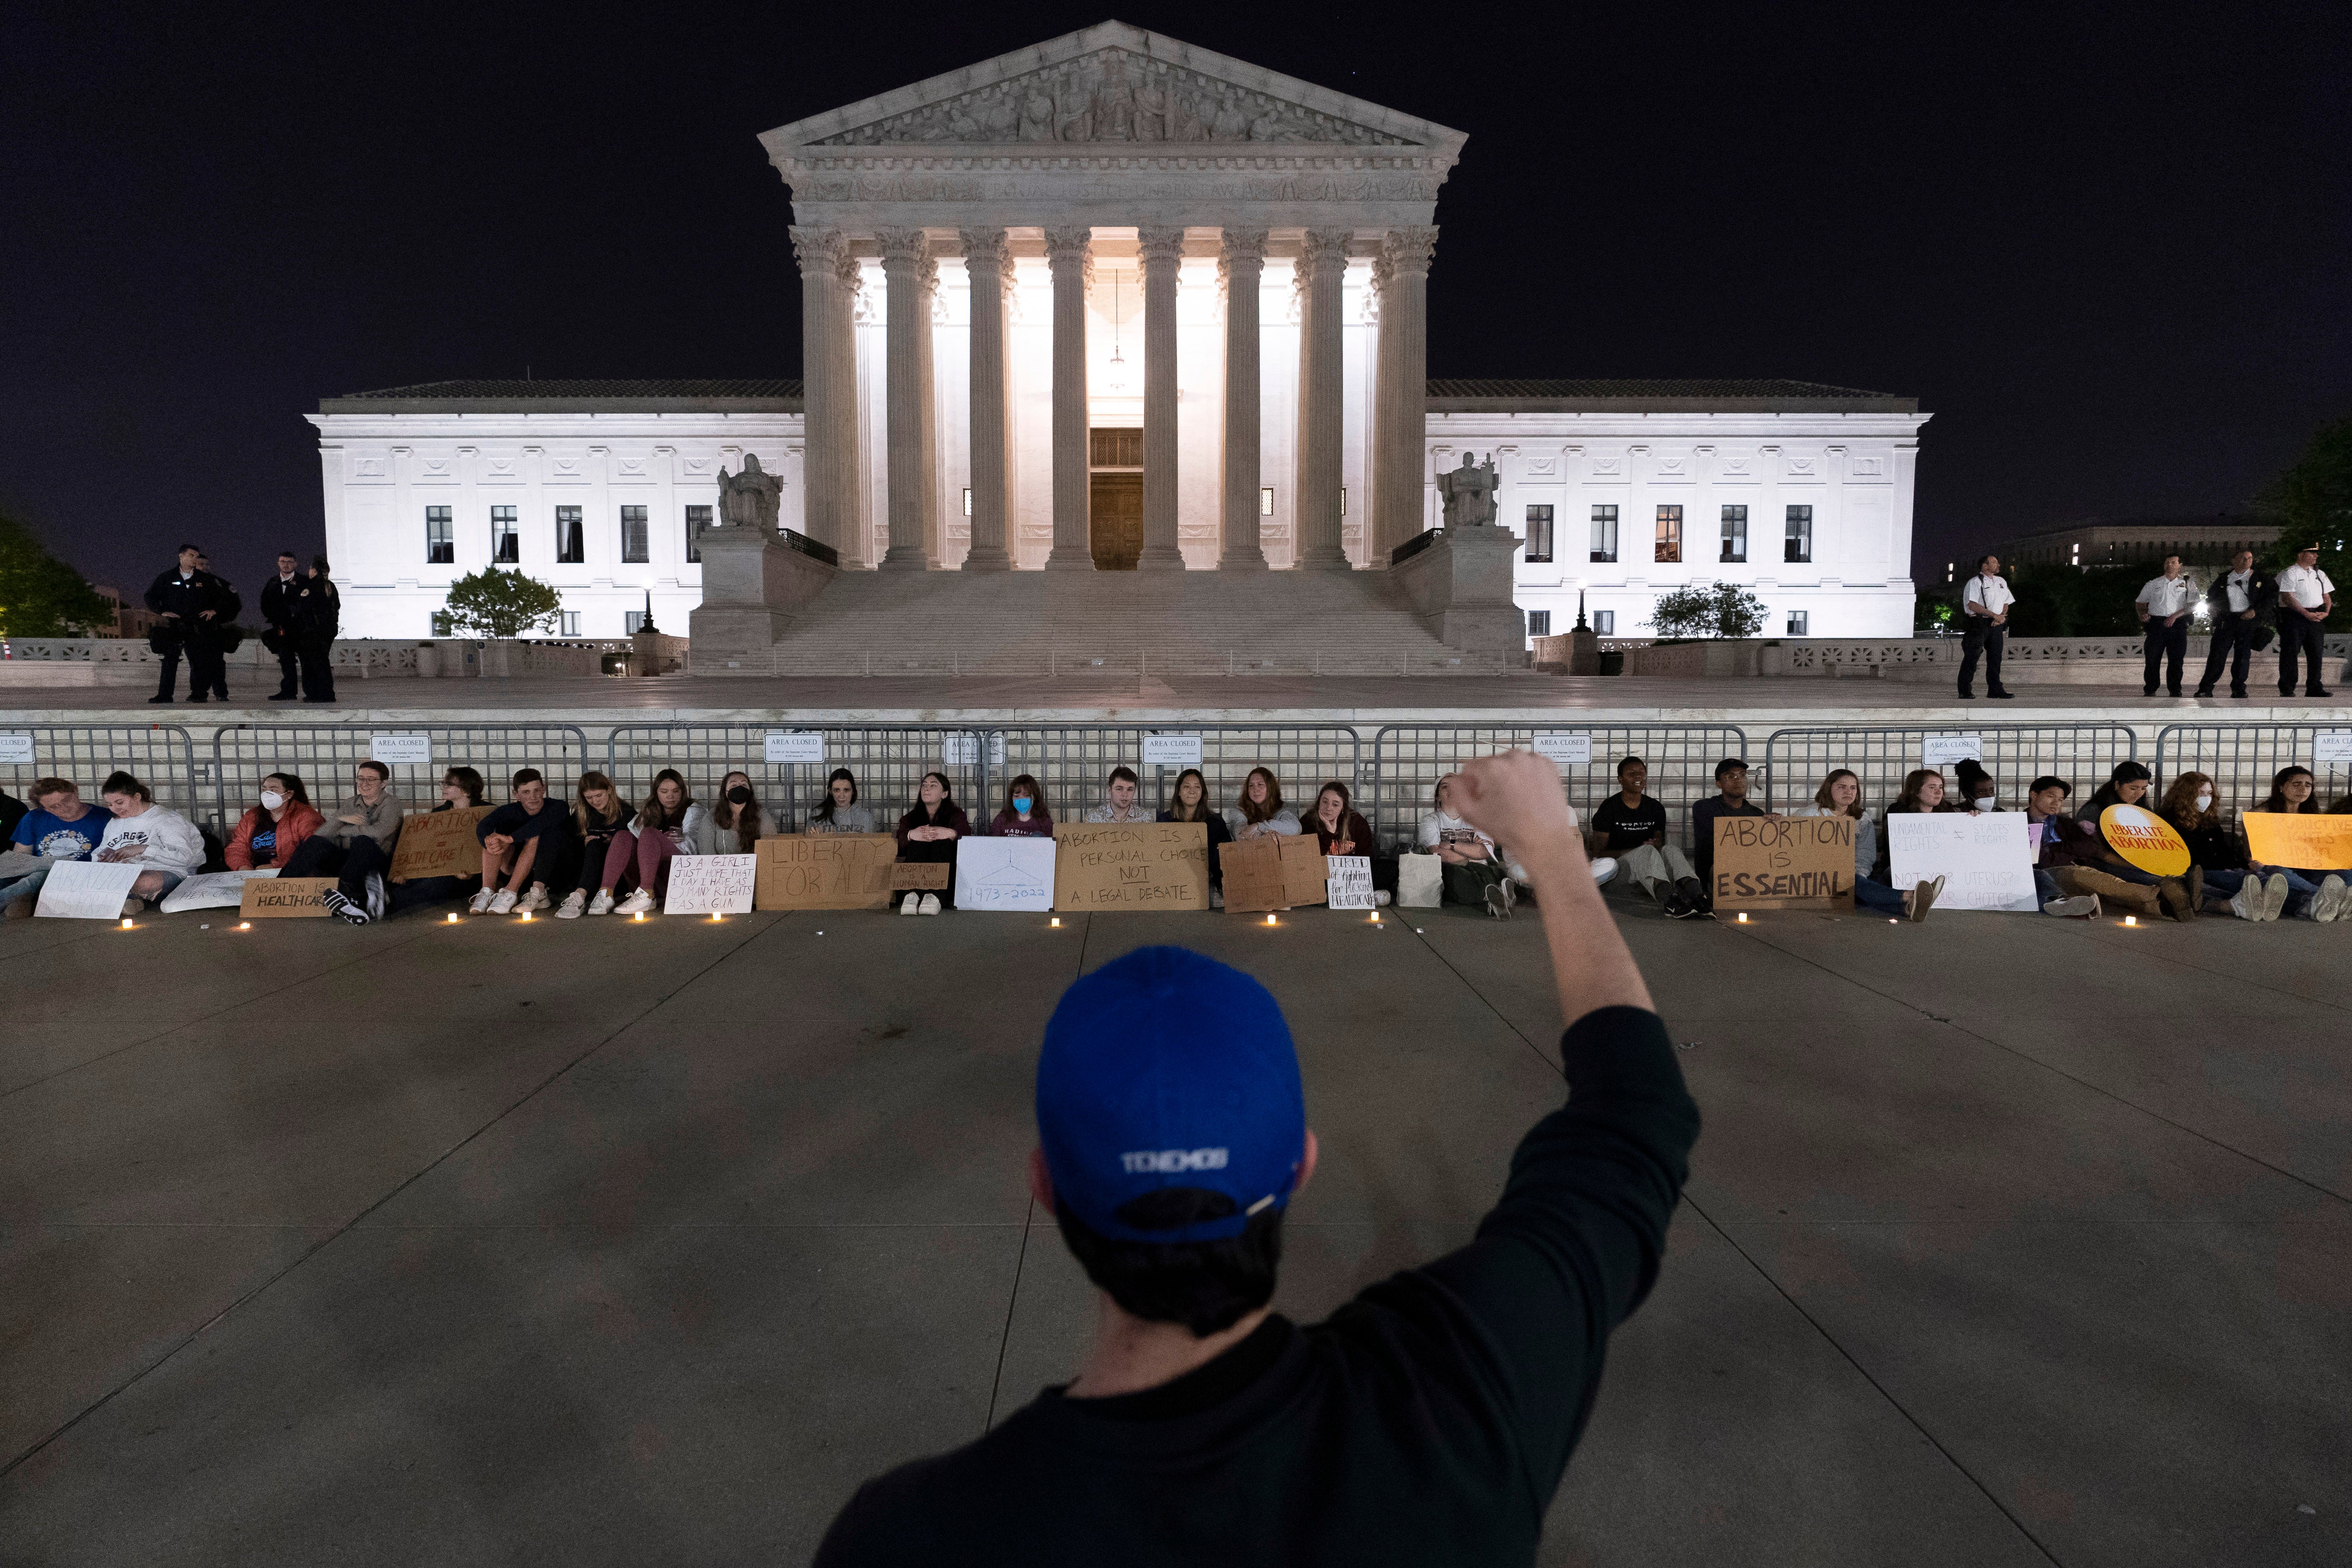 As the Supreme Court considers overturning the landmark abortion law, emotions will run high on both sides of the debate